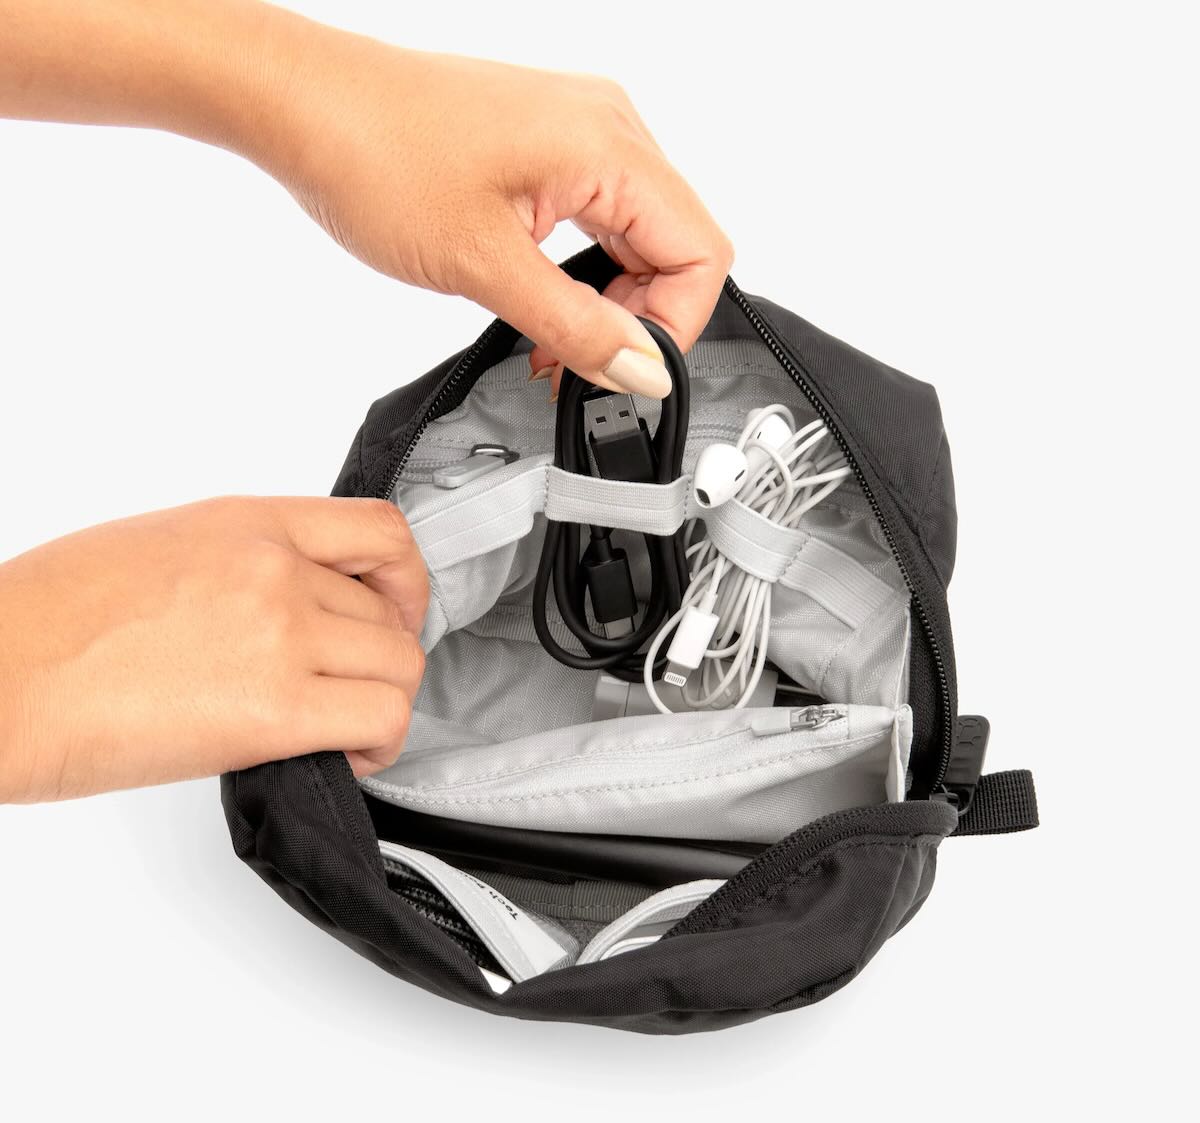 Tortuga's travel tech organizer, designed to keep cables and chargers neat in your suitcase or travel backpack. 